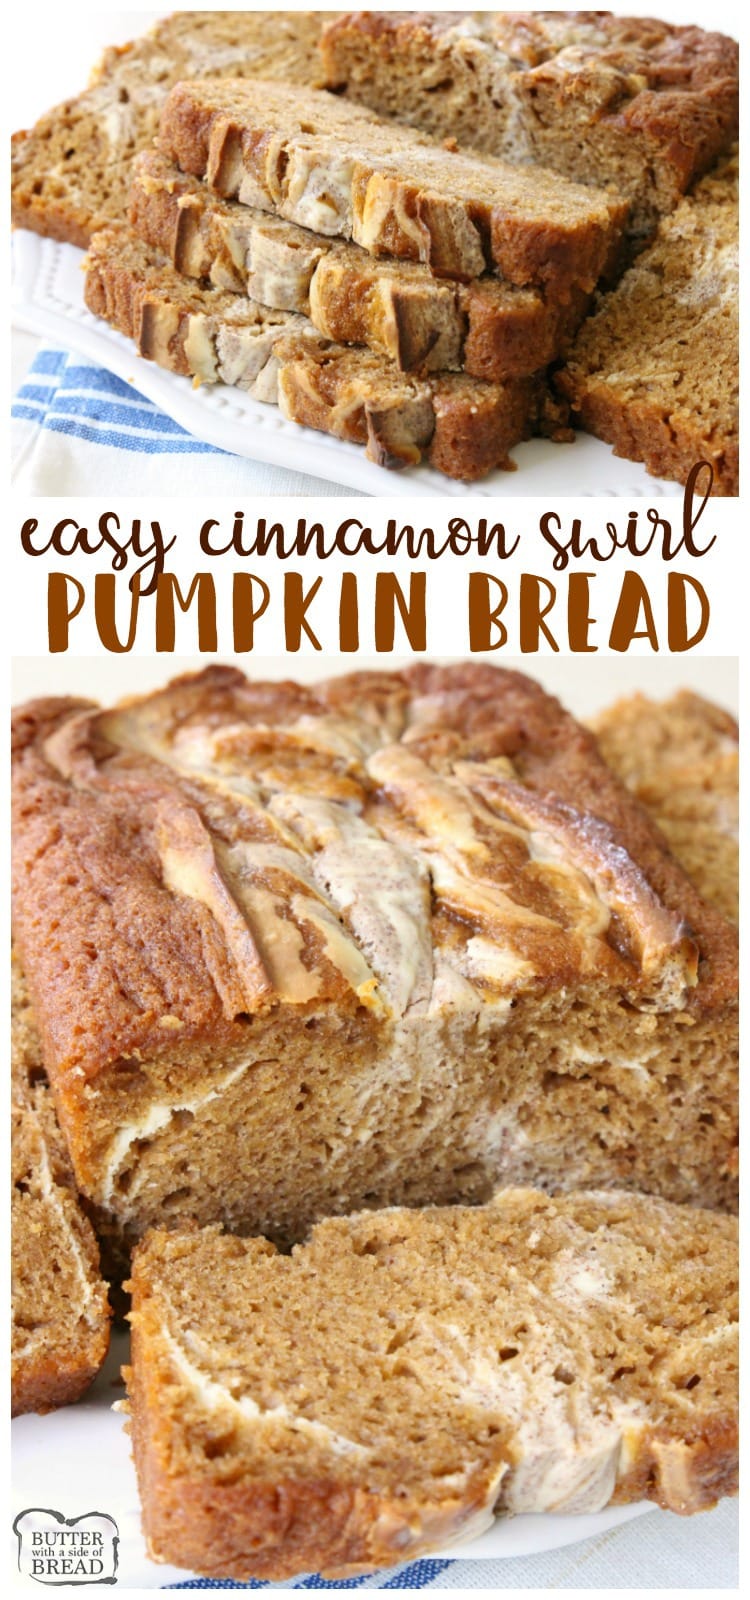 Cinnamon Swirl Pumpkin Bread is a delightful twist on a classic that incorporates sweet cream cheese and cinnamon swirled into a soft pumpkin bread. Easy #pumpkin #bread recipe from Butter With A Side of Bread